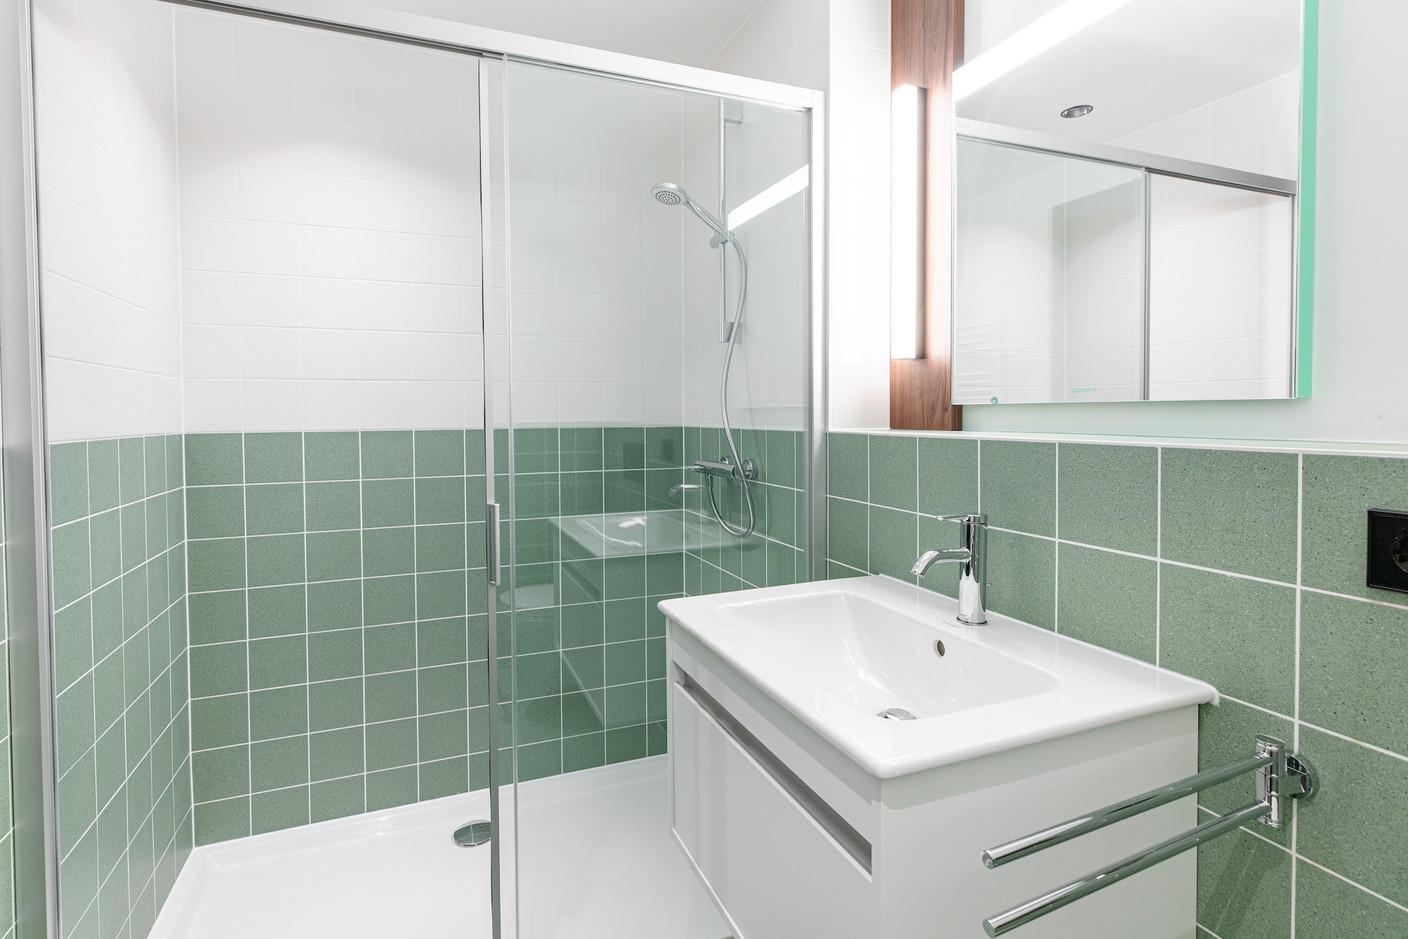 The shower room is simple and efficient. Photo: Cocoonut